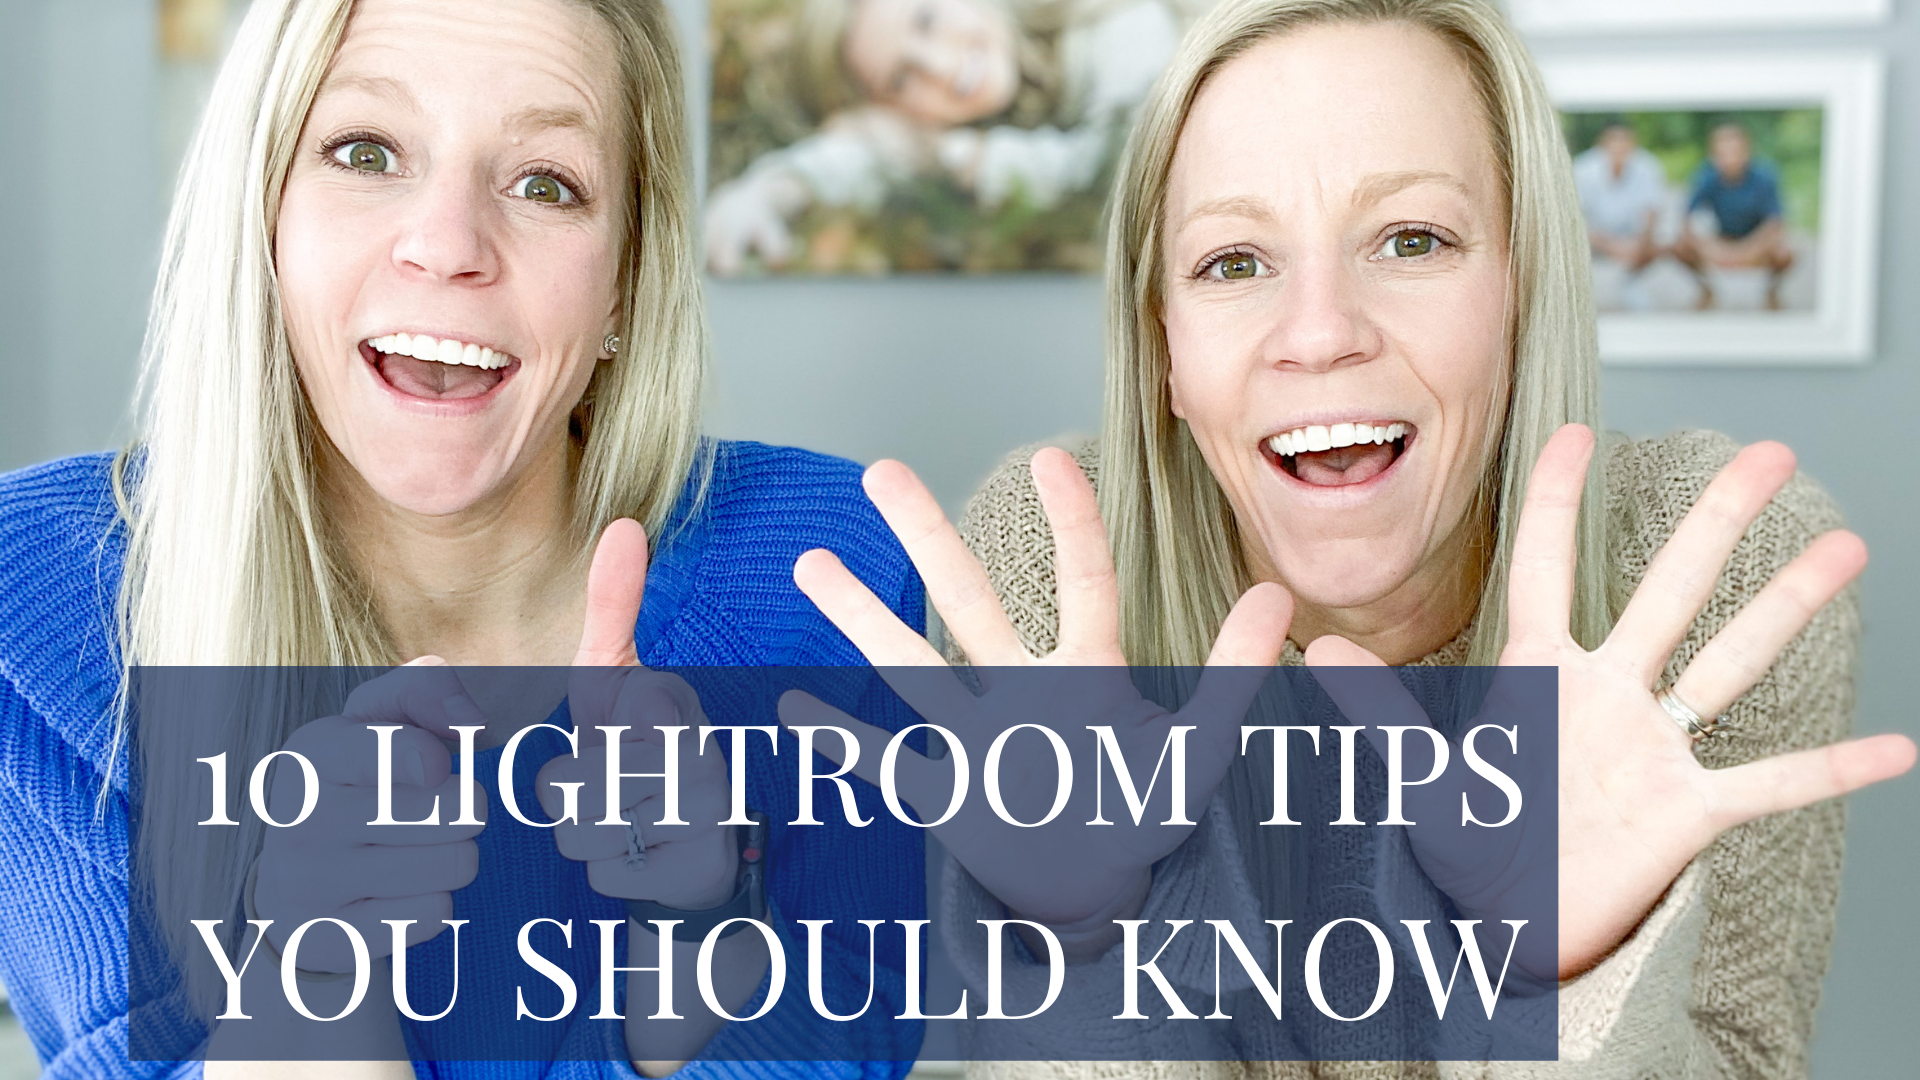 10 LIGHTROOM TIPS YOU SHOULD KNOW TO SAVE YOU TIME